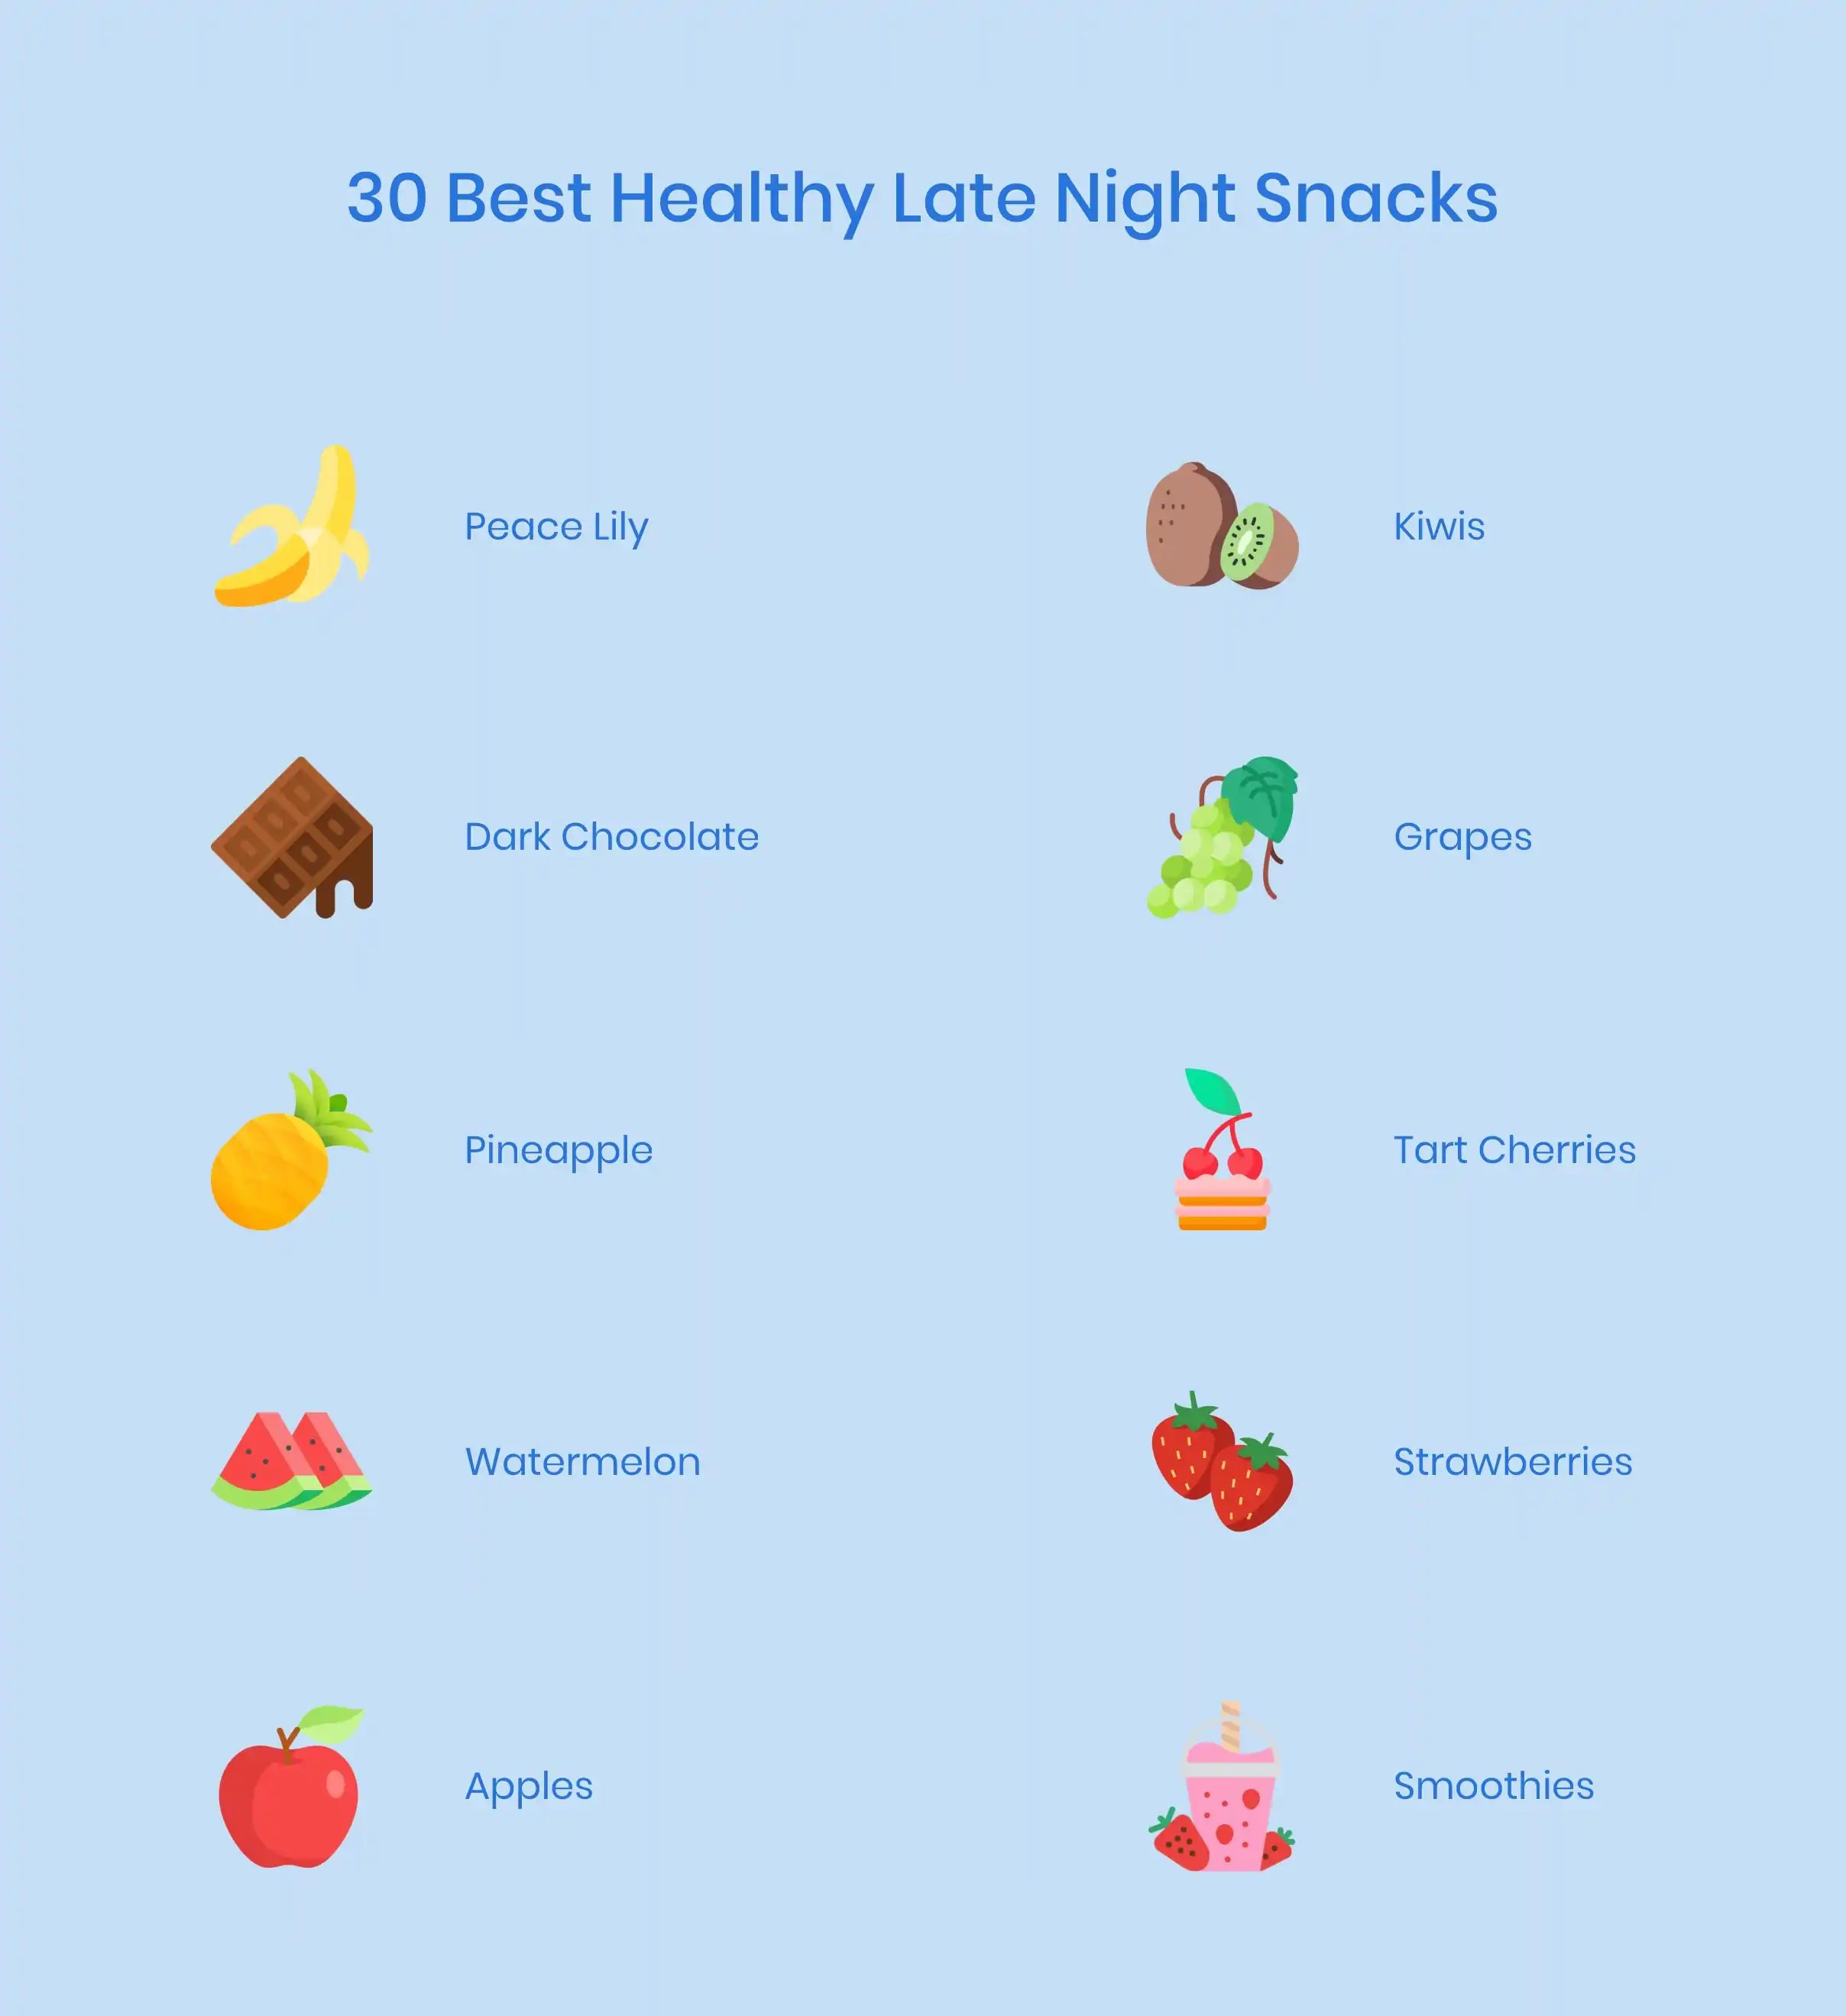 25 Healthy Midnight Snacks for Late Night Snacking - PureWow